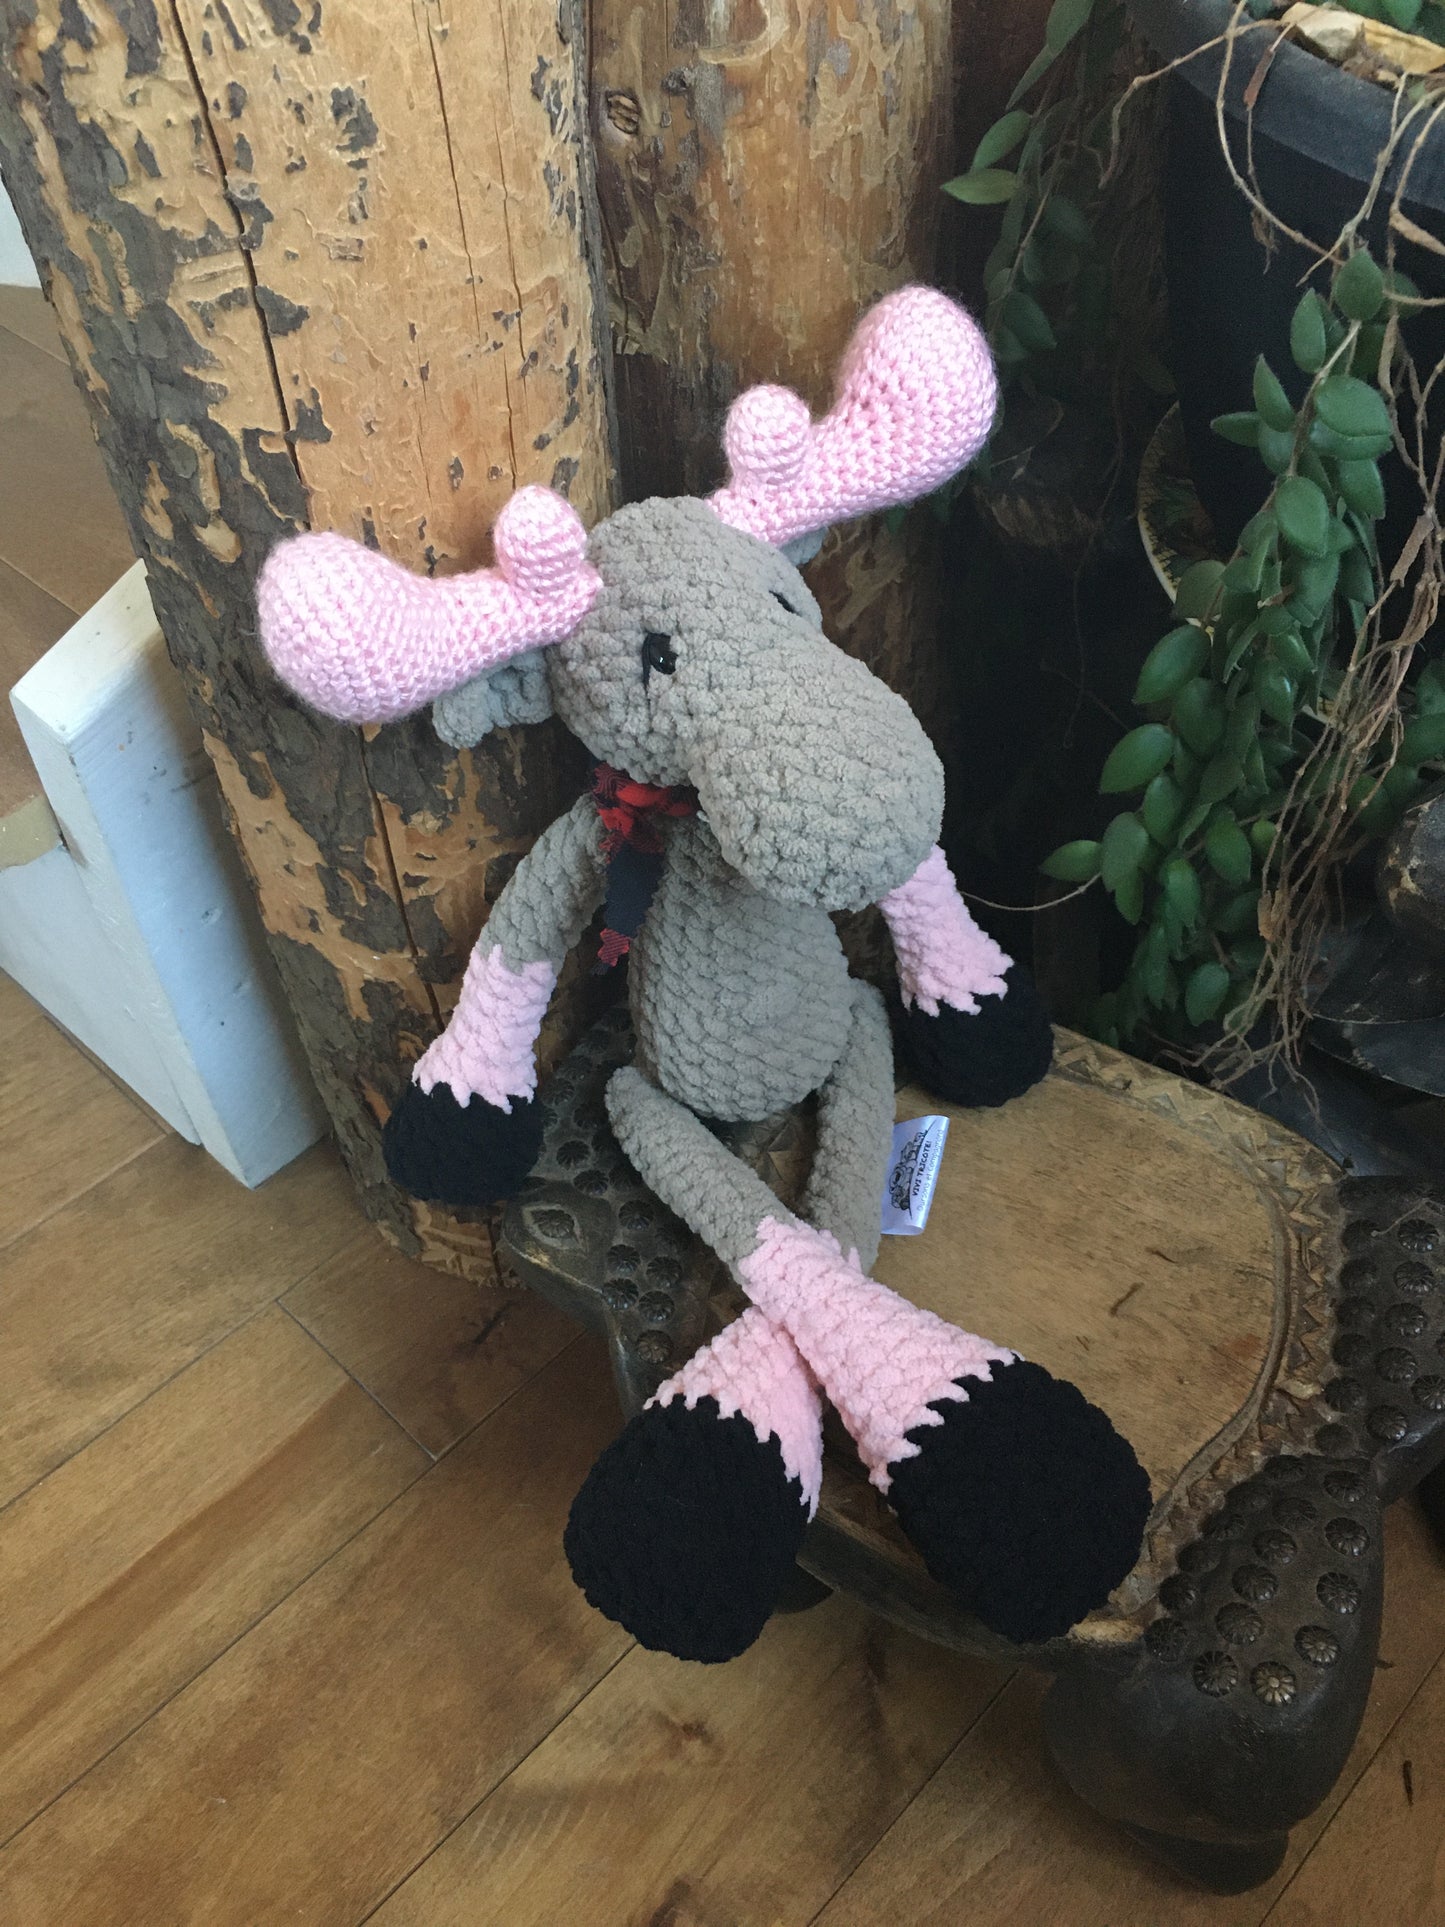 Jack le Nonorignal / the Moomoose - CROCHET PATTERN to download, French or English PDF